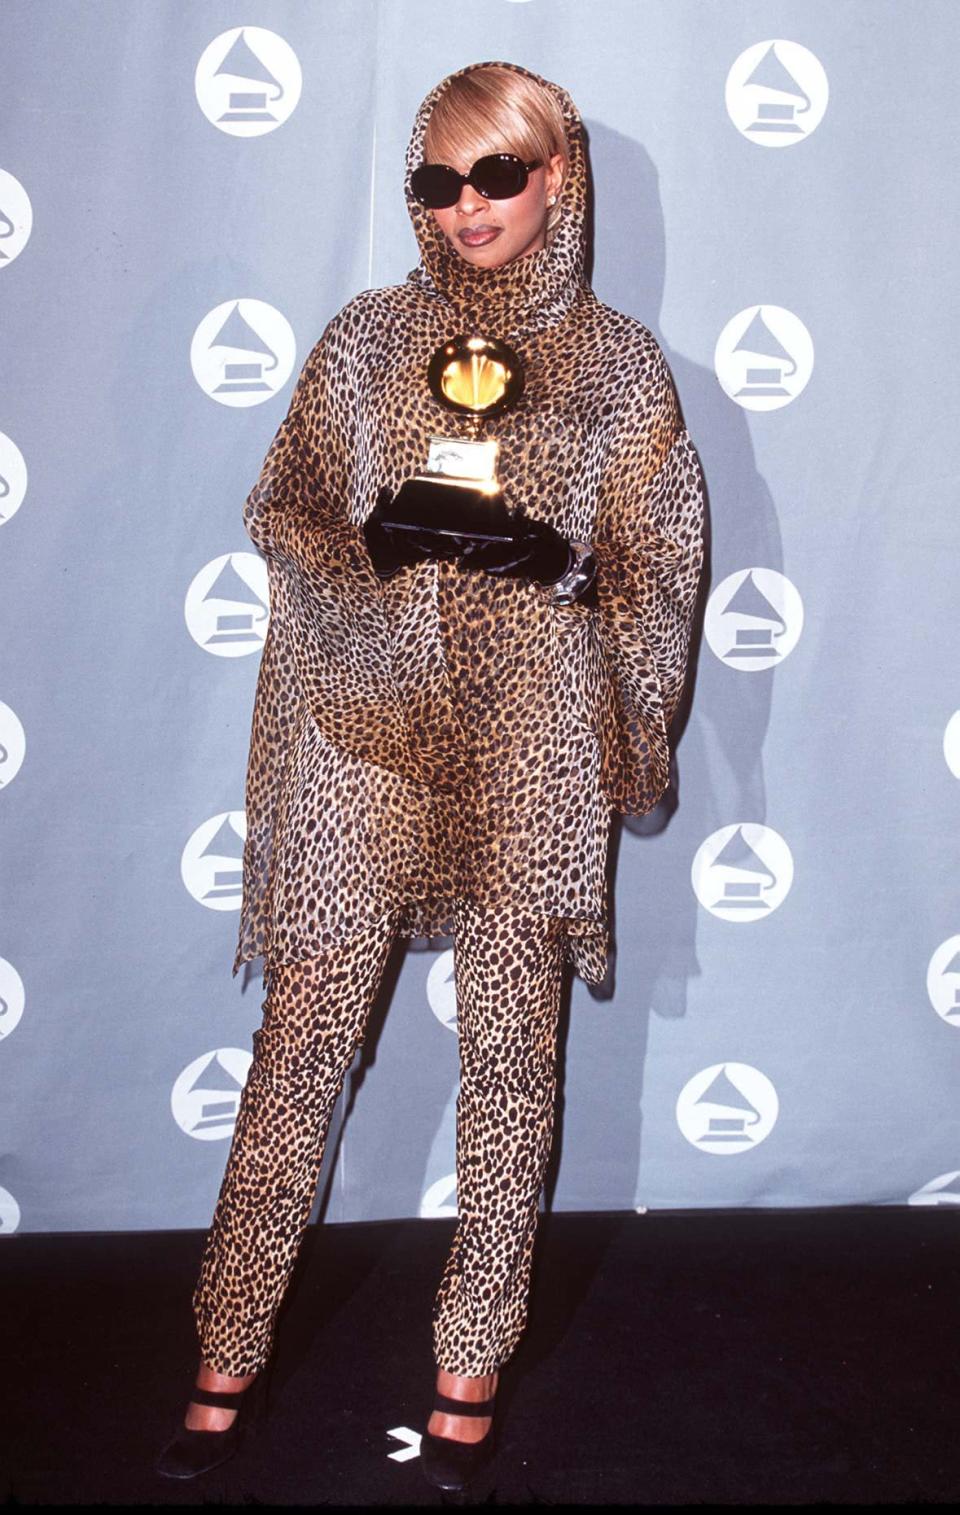 <p>Mary J. Blige wore leopard print from head to toe for her 1996 Grammys look. She accessorized with neutral black sunglasses, gloves, and shoes to balance her wild ensemble.</p>